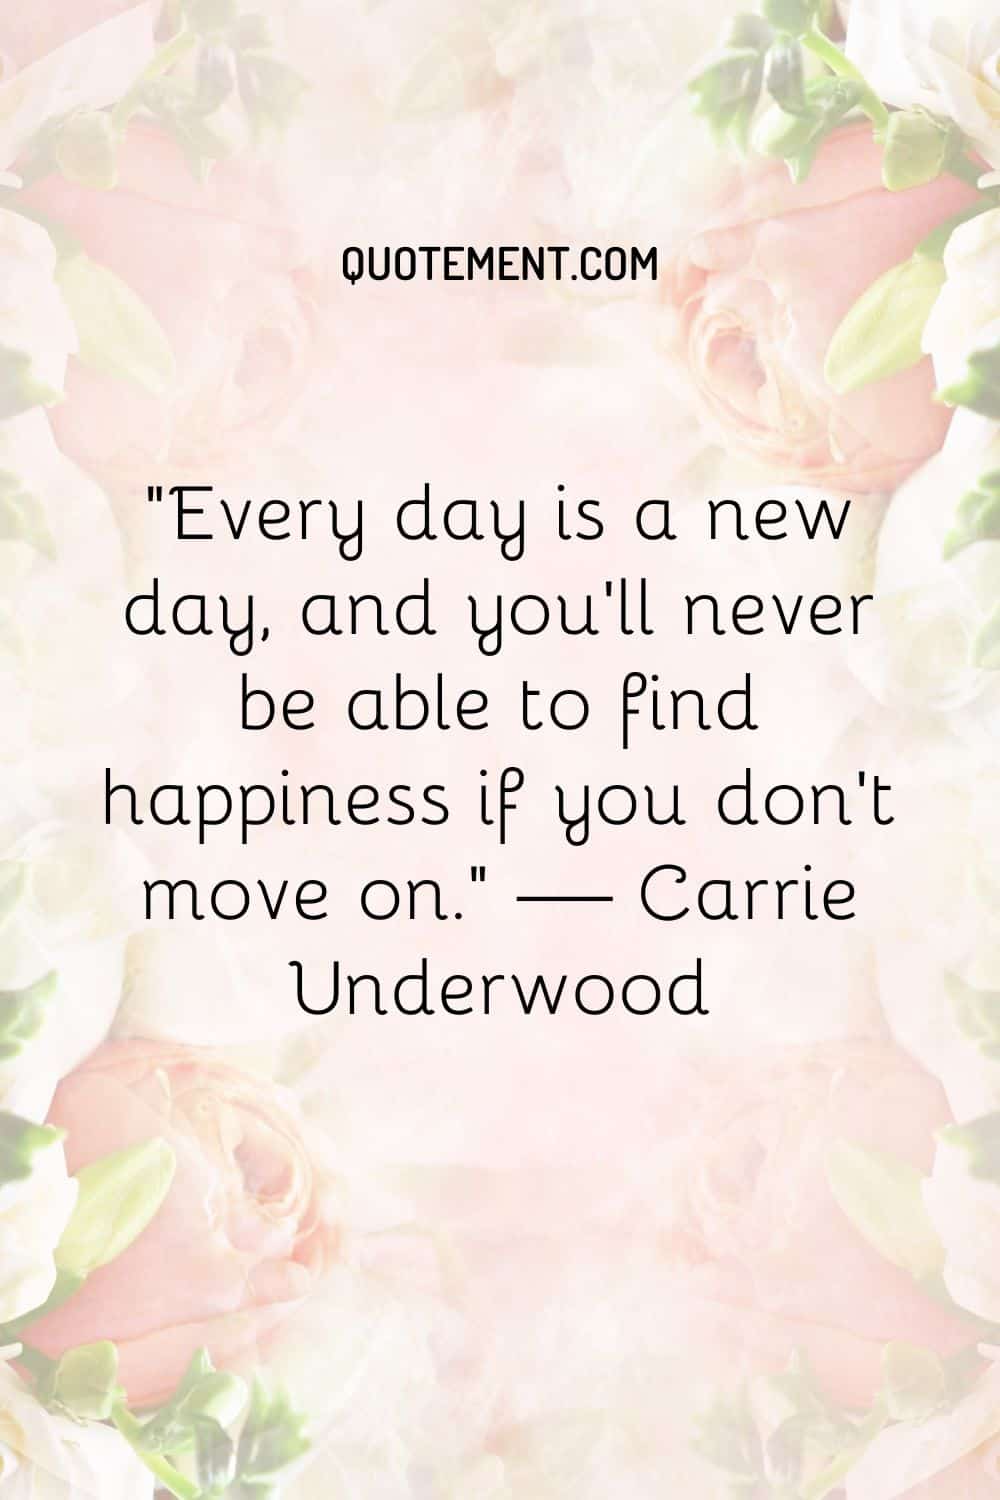 Every day is a new day, and you’ll never be able to find happiness if you don’t move on